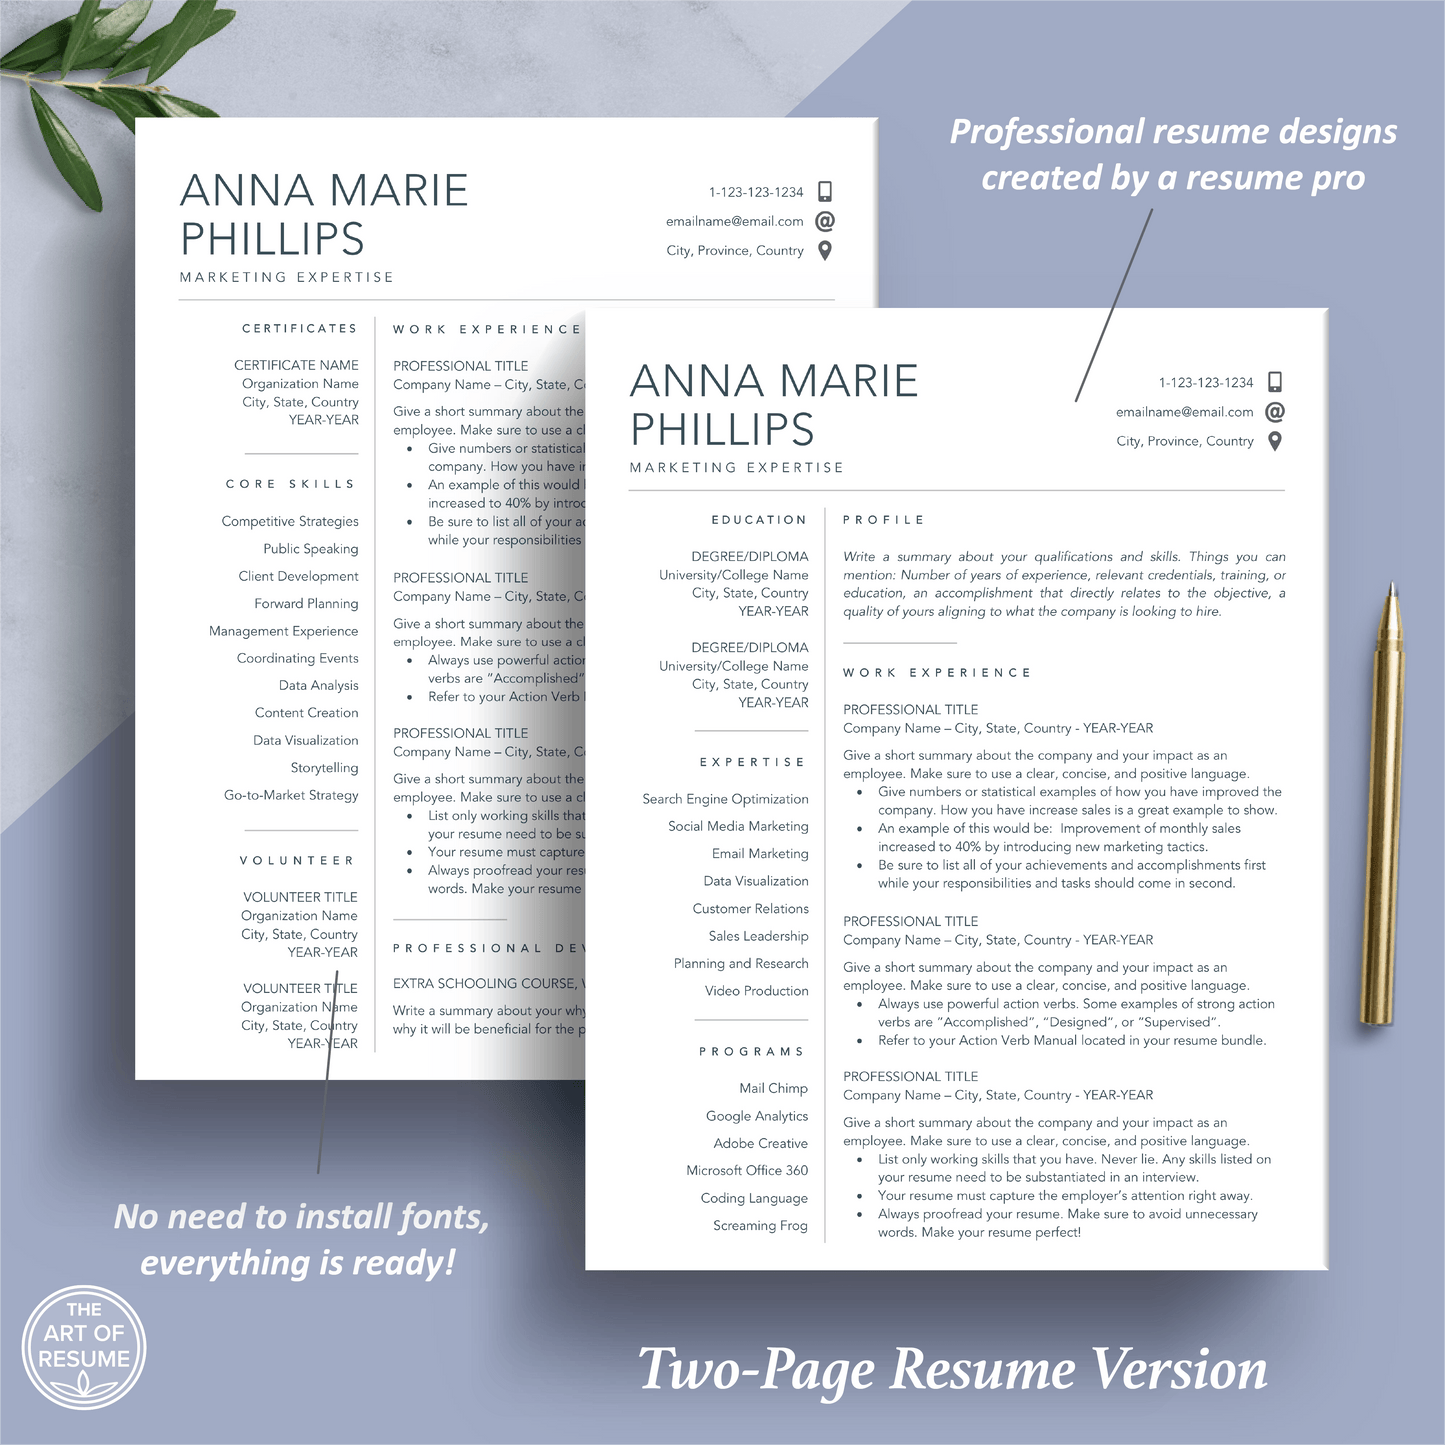 The Art of Resume Templates | One Page Professional Simple Clean Minimalist Resume CV Design Template Maker | Curriculum Vitae